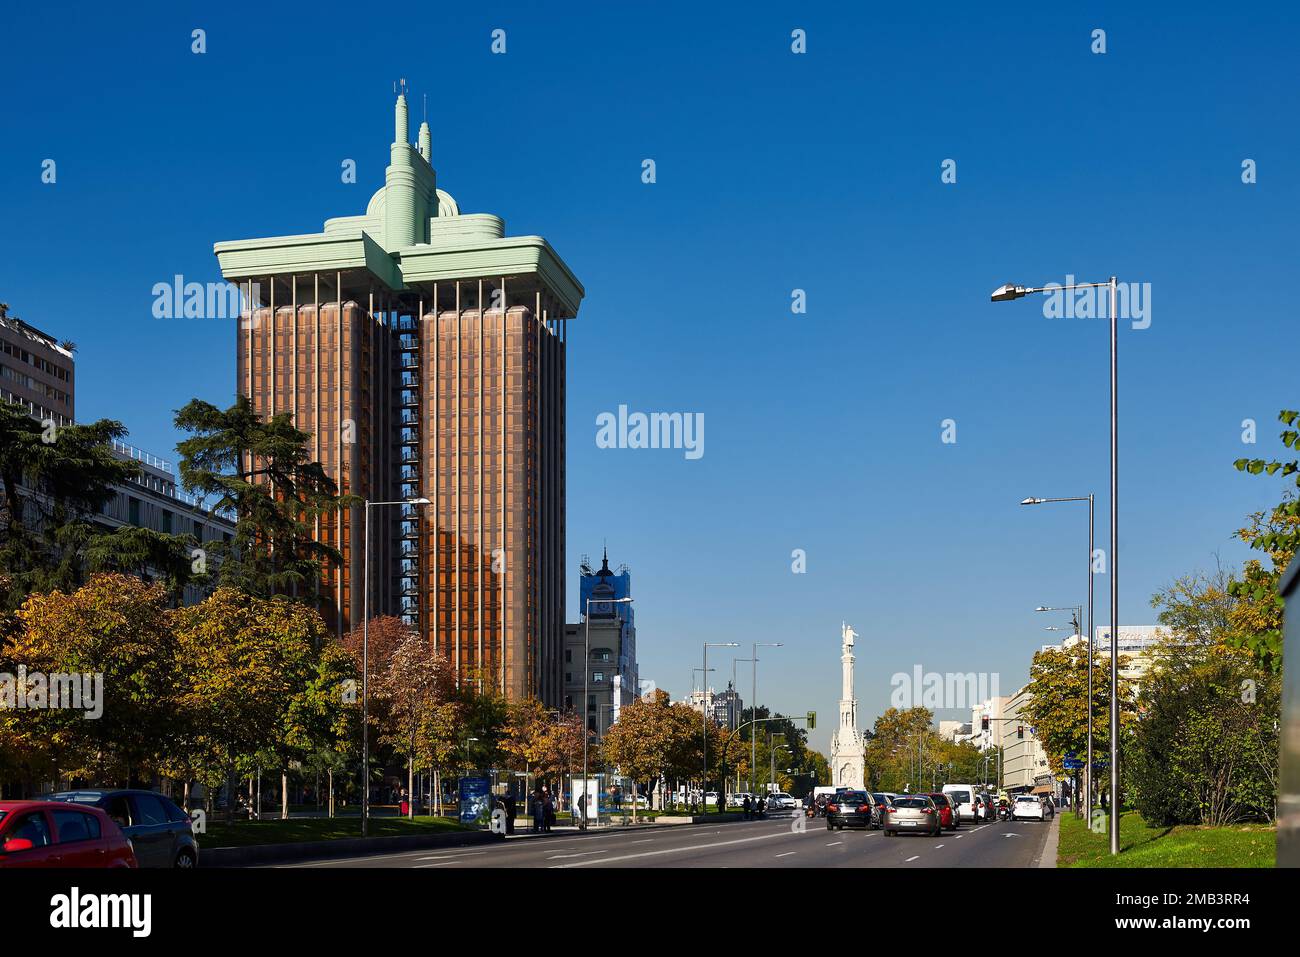 The famous Building called Colon Towers, in the  Paseo de Recoletos, Madrid, Spain, Europe Stock Photo